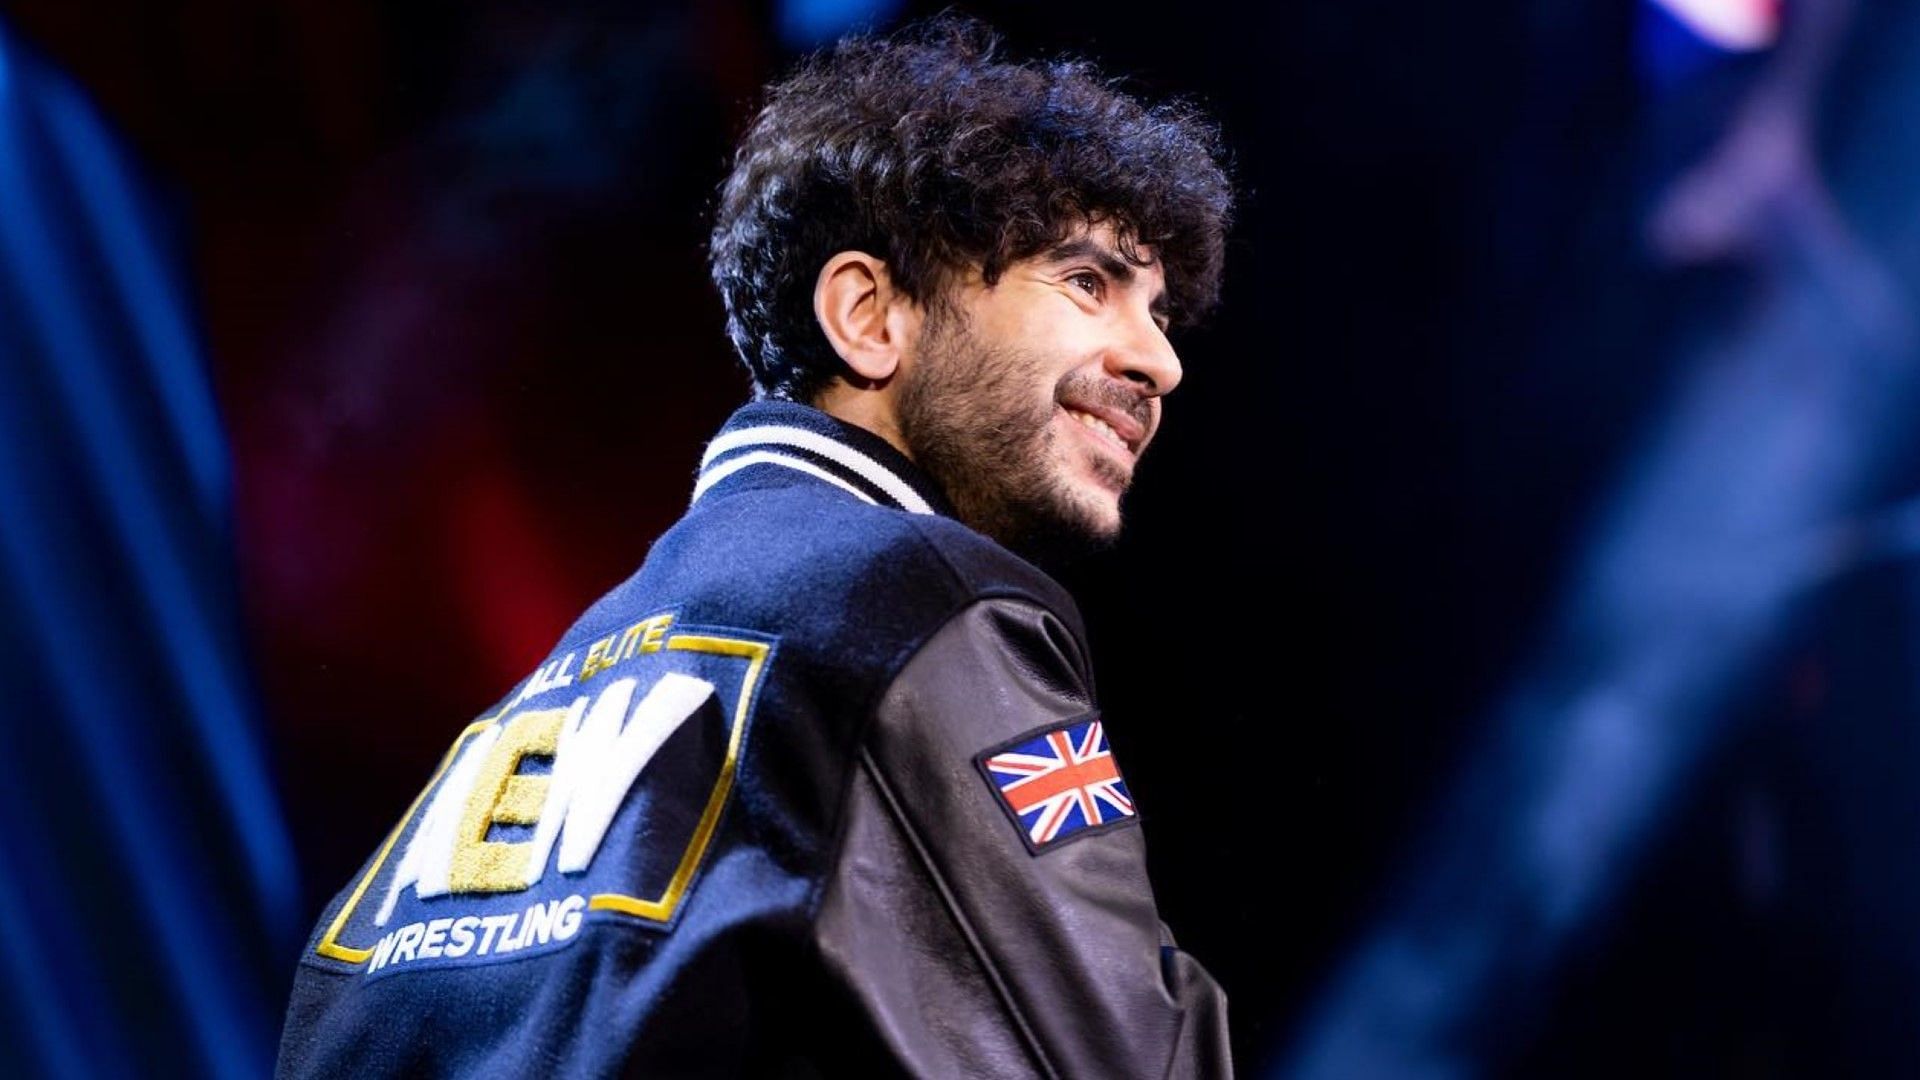 AEW President Tony Khan looks on at Dynamite from Daily